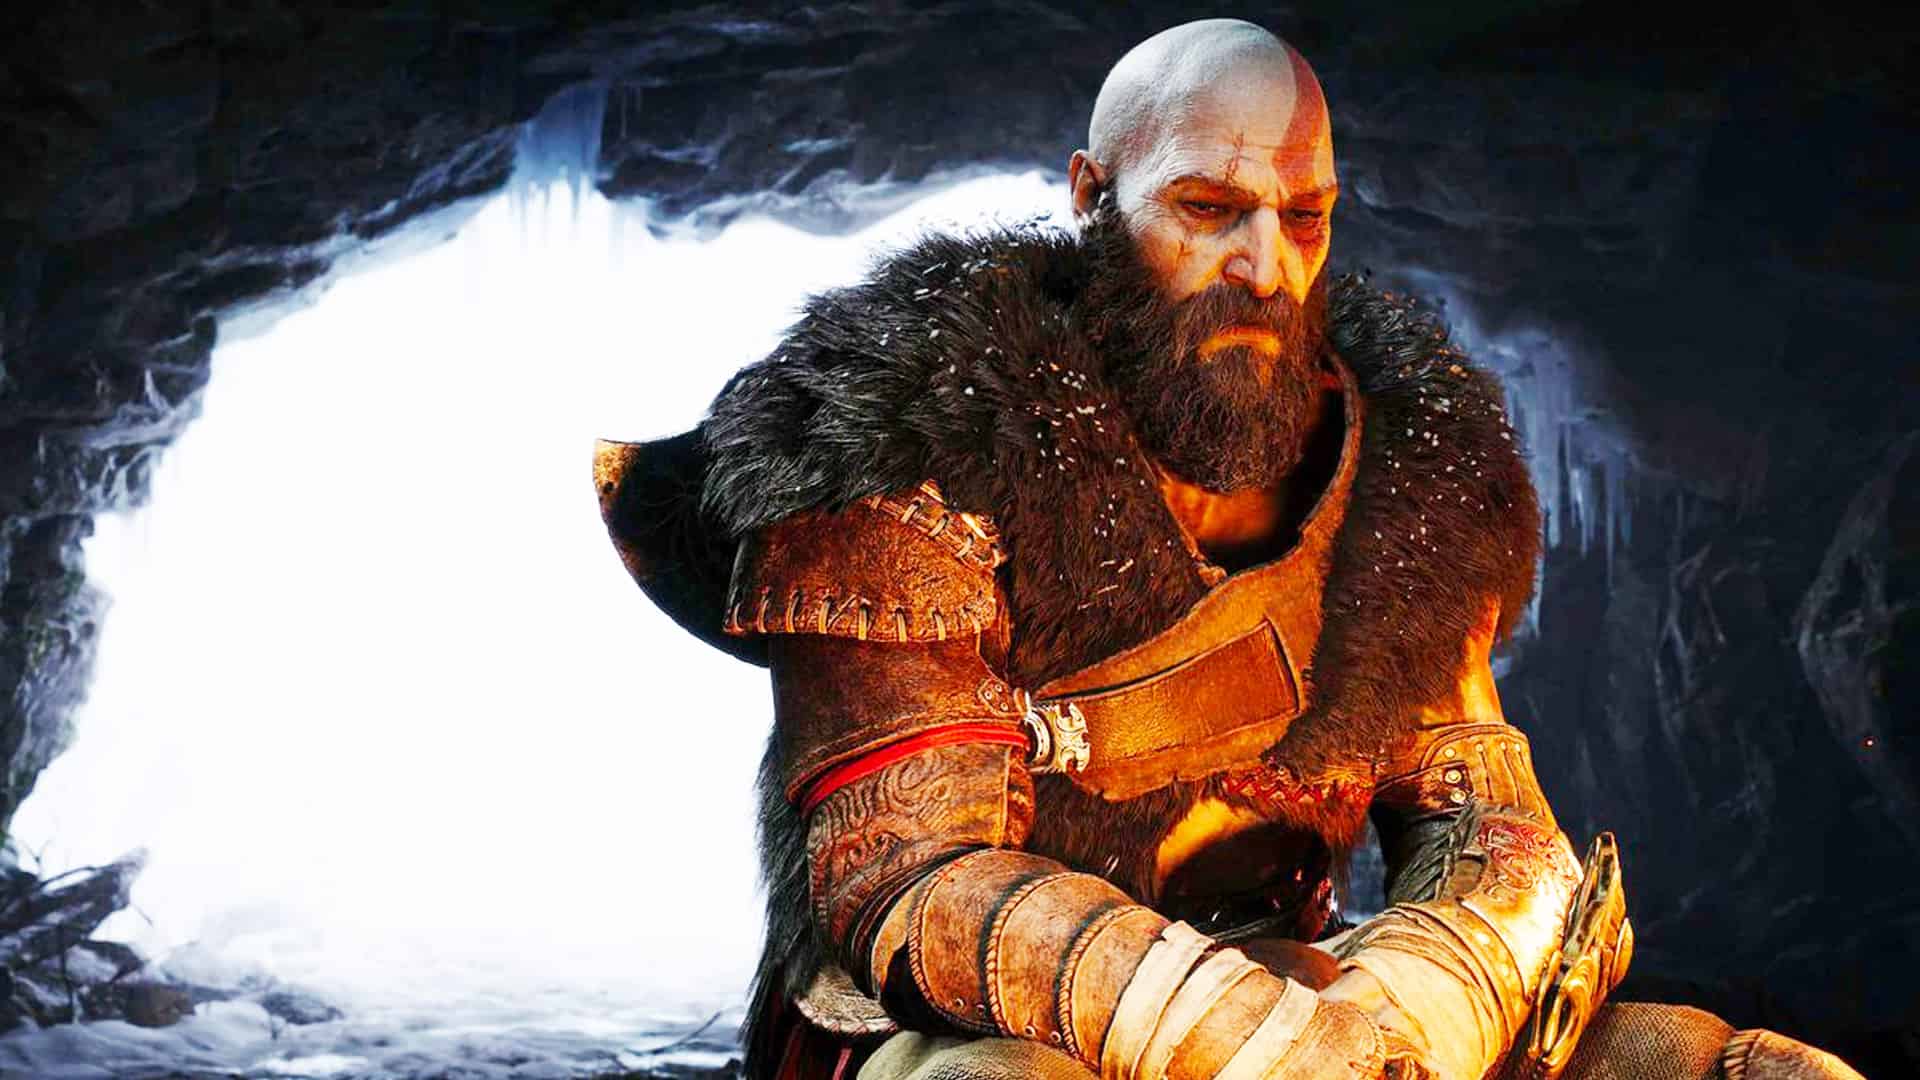 Do you think kratos was holding back during his first fight with Thor  because later he wins.